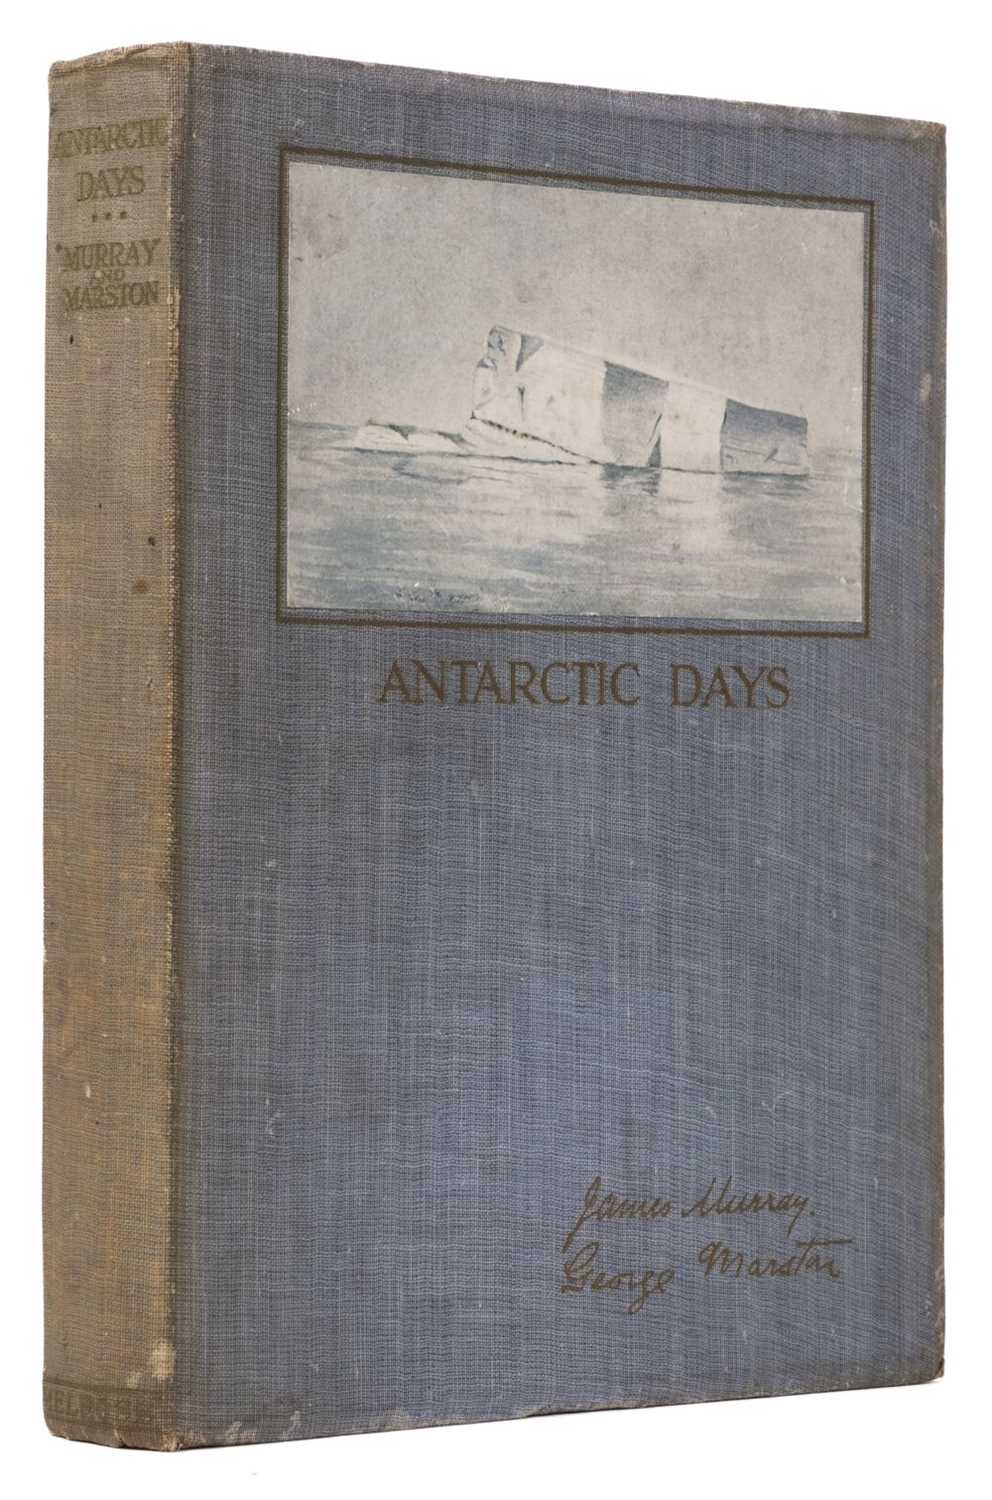 Lot 22 - Murray (James. George Marston). Antarctic Days, edition de luxe, London: Andrew Melrose, 1913